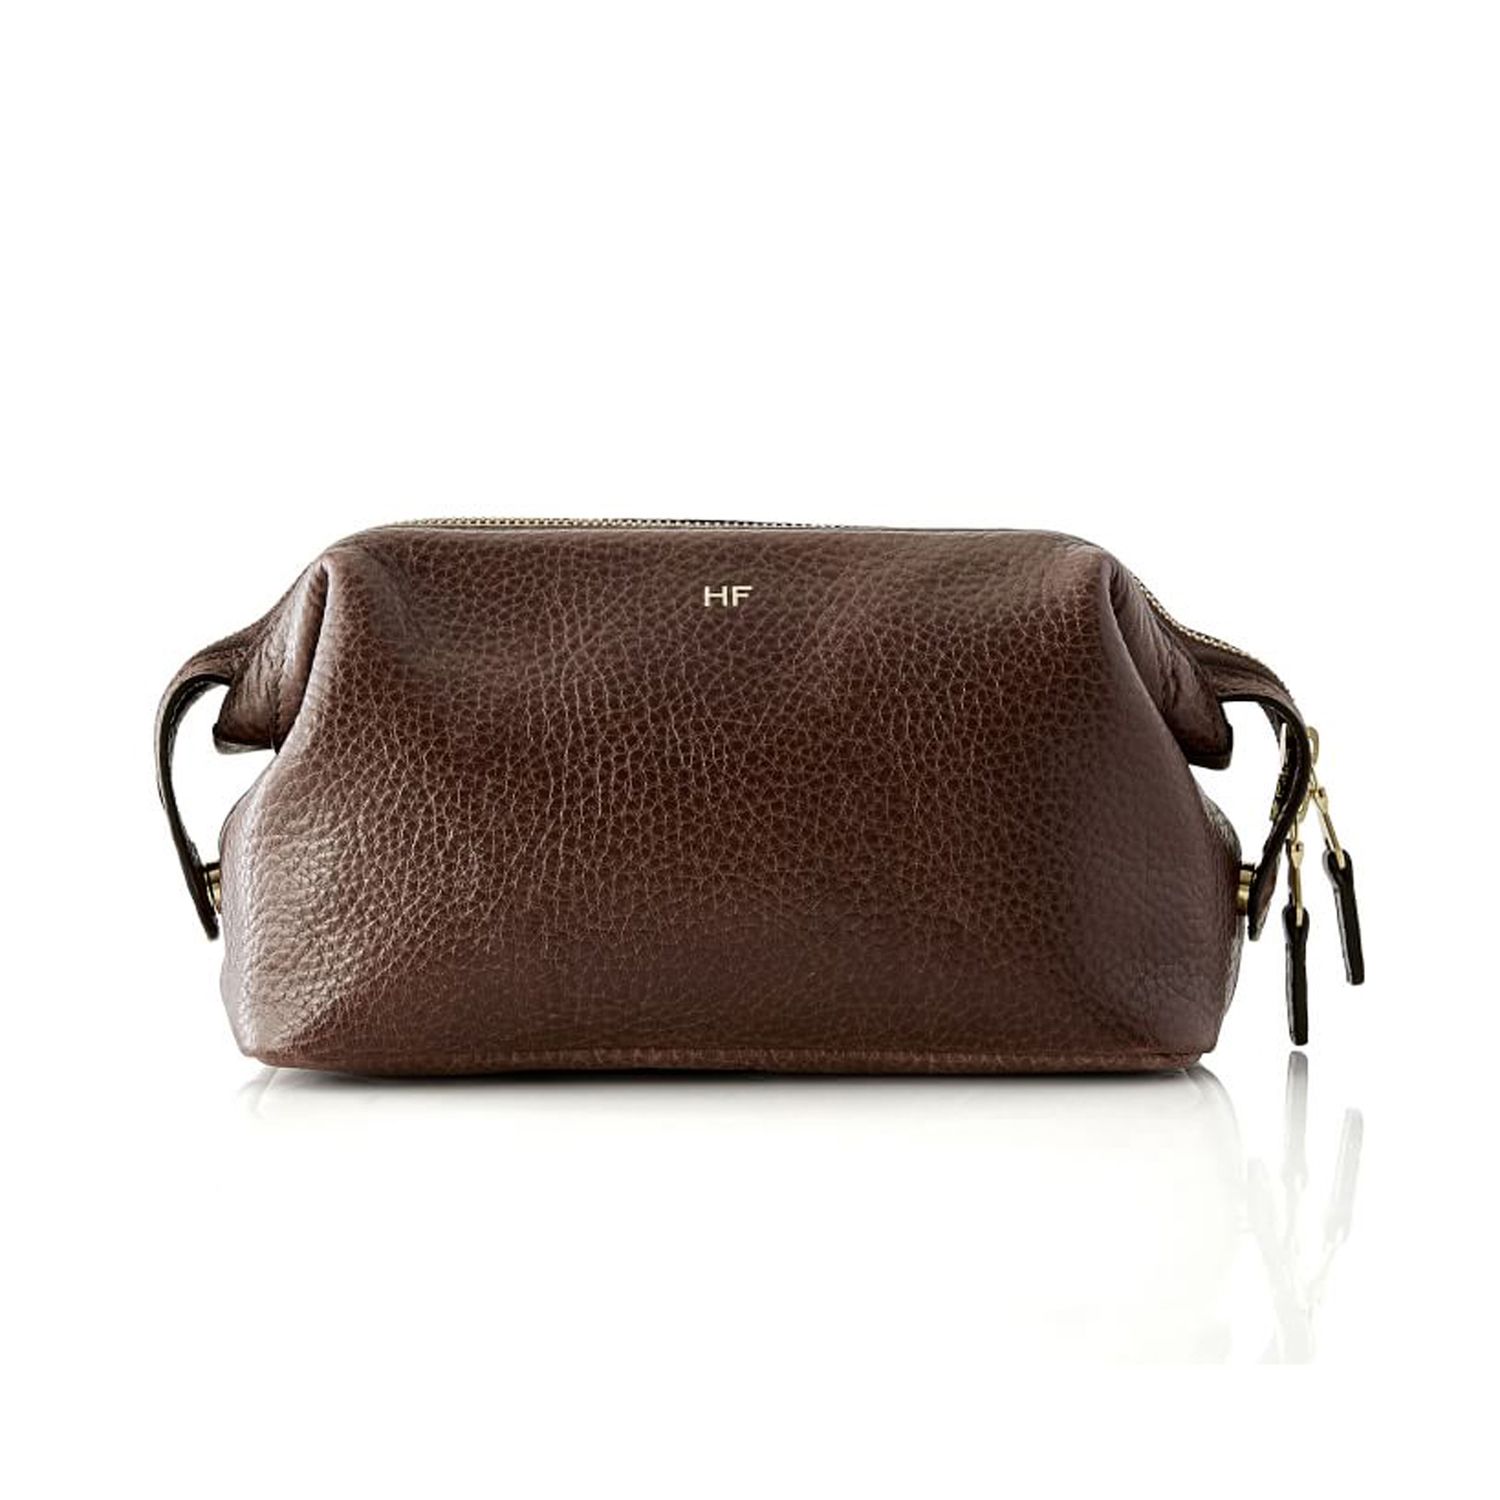 Holiday Gifts for Brothers 2020: Mark and Graham leather travel dopp kit in chocolate brown